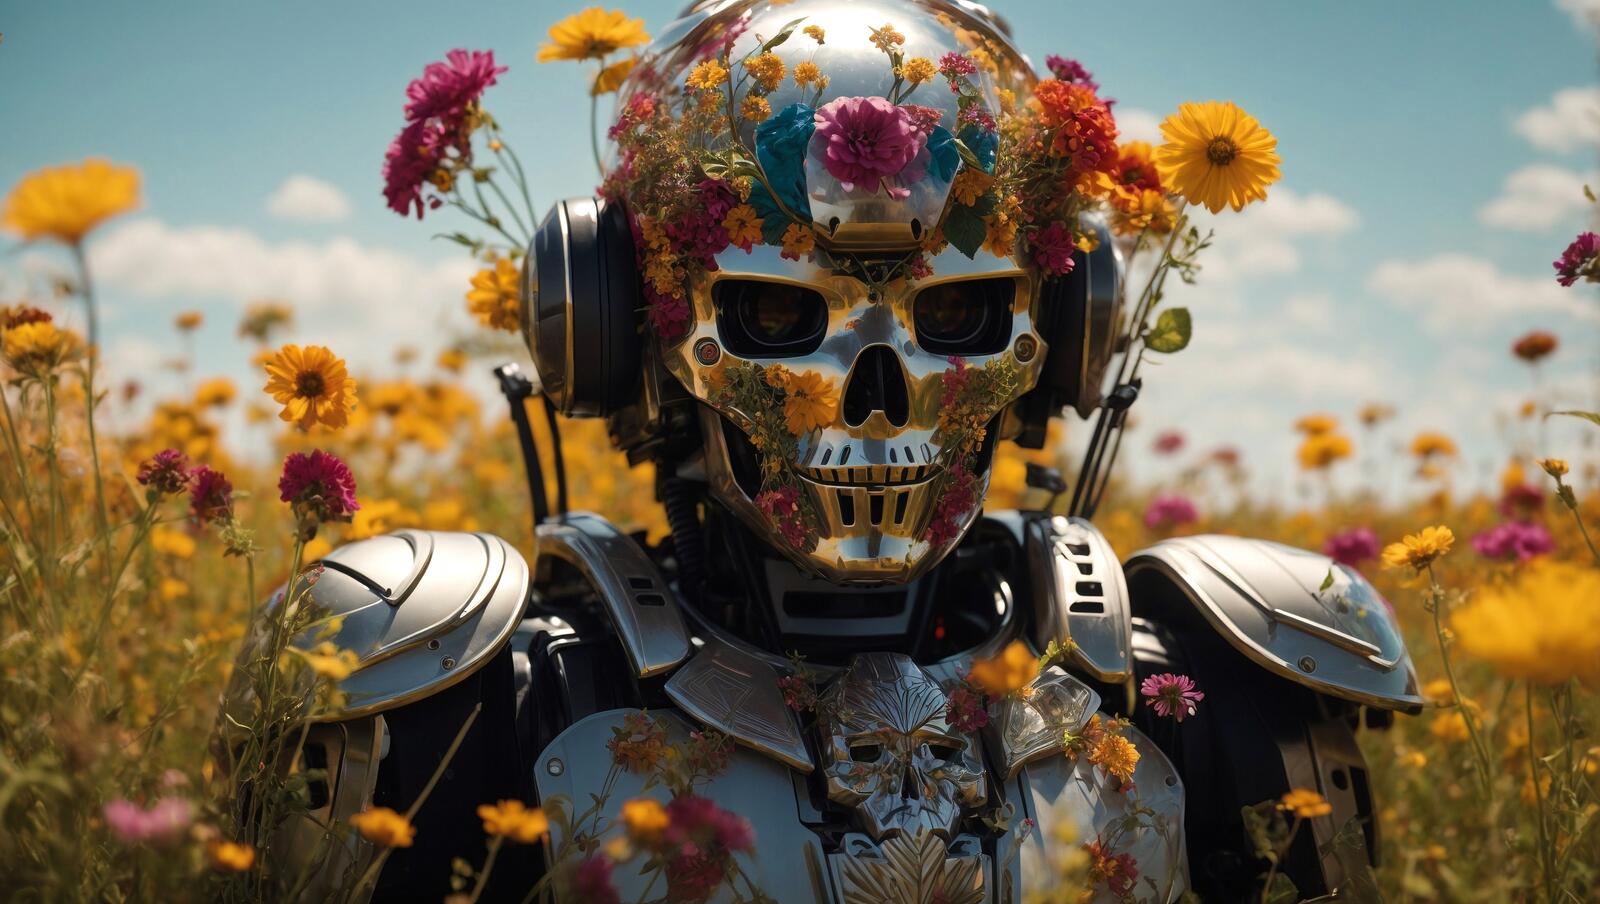 Free photo A skeleton in a flower filled field with yellow flowers